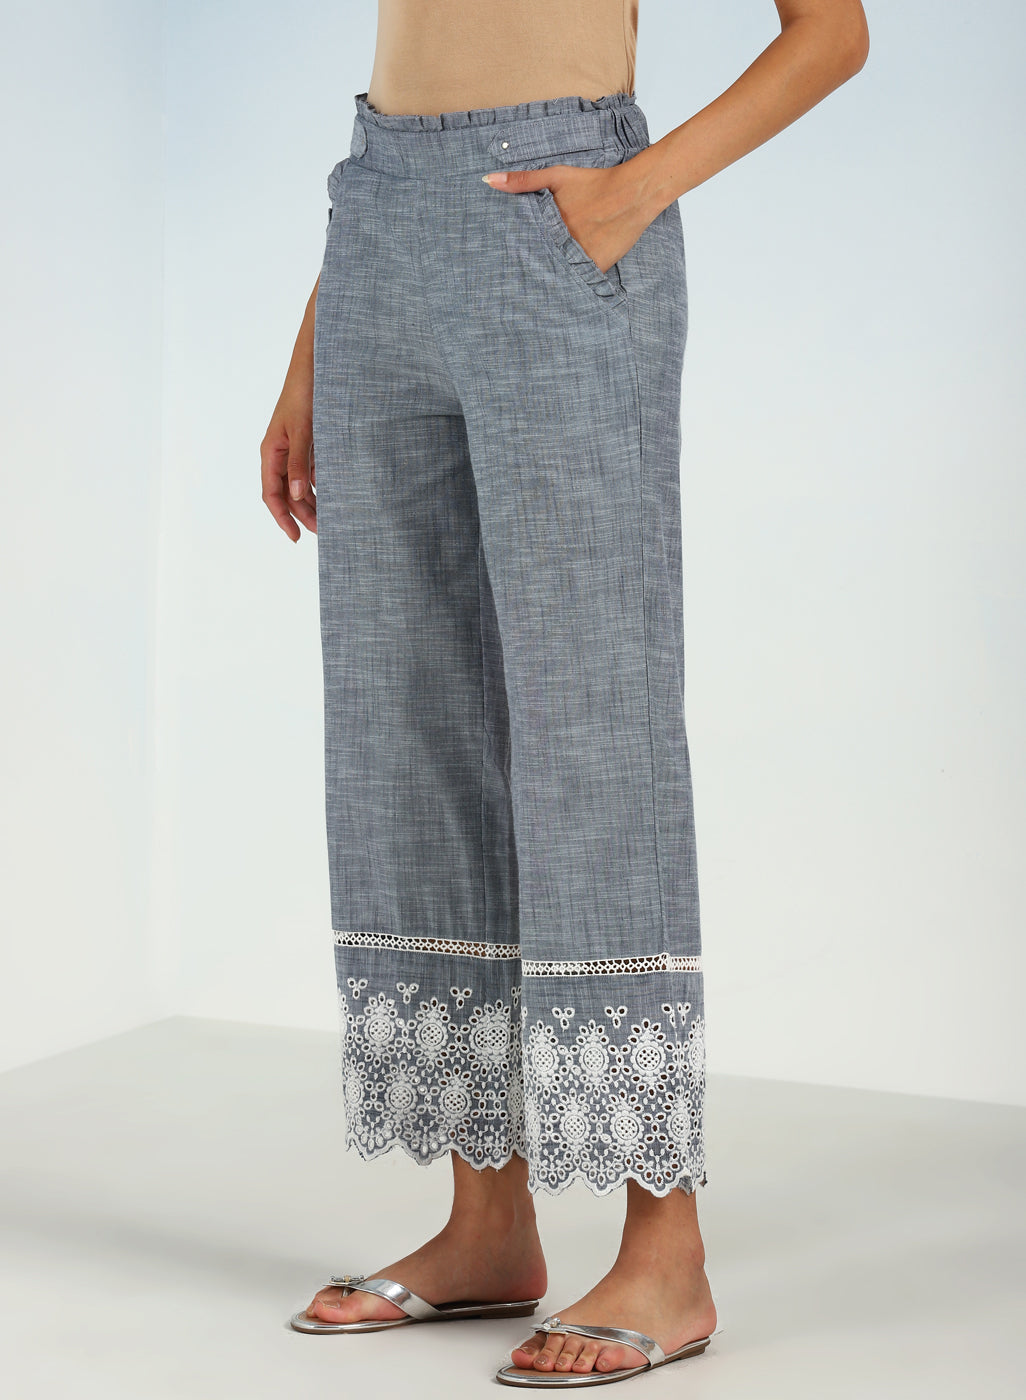 Blue Pure Cotton Ankle-length Pants for Women with Detailing on the Hem